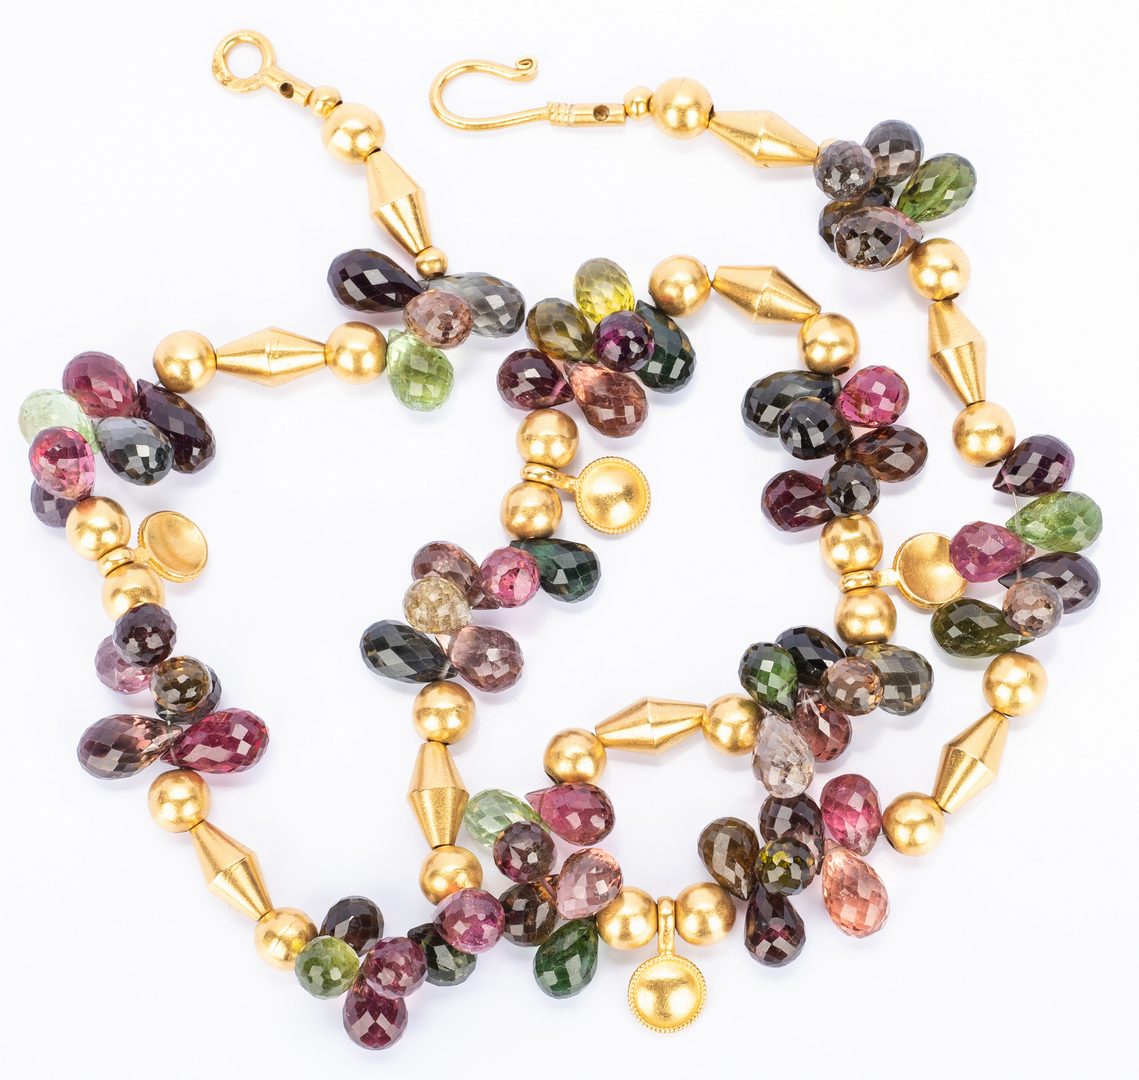 Lot 408: Two Gold and Gemstone Necklaces